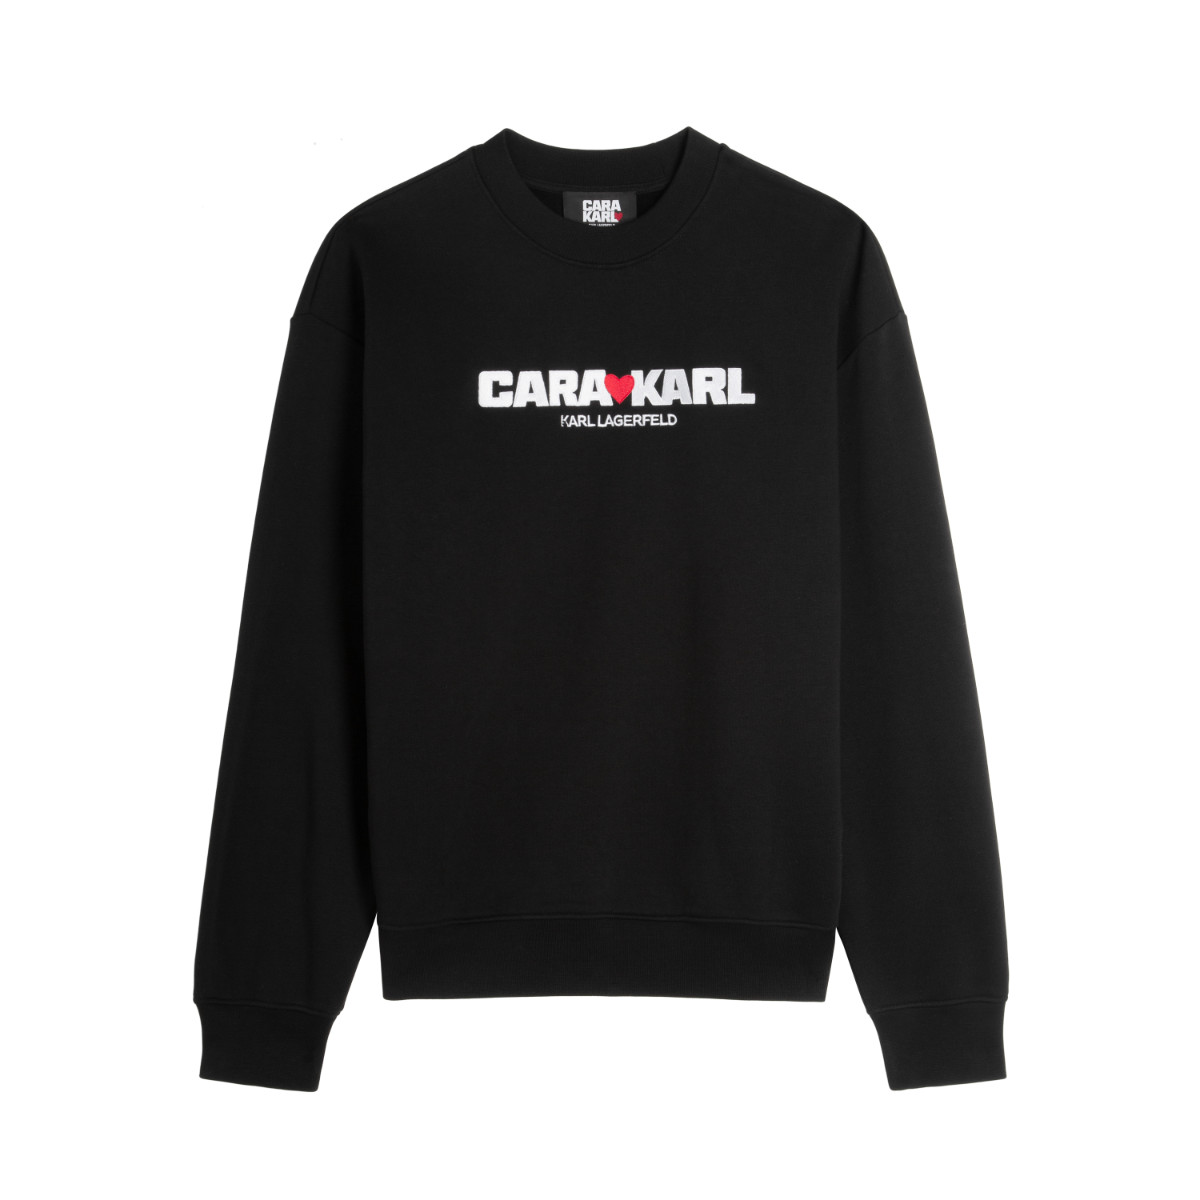 Karl Lagerfeld Presents Its New CARA LOVES KARL Collection